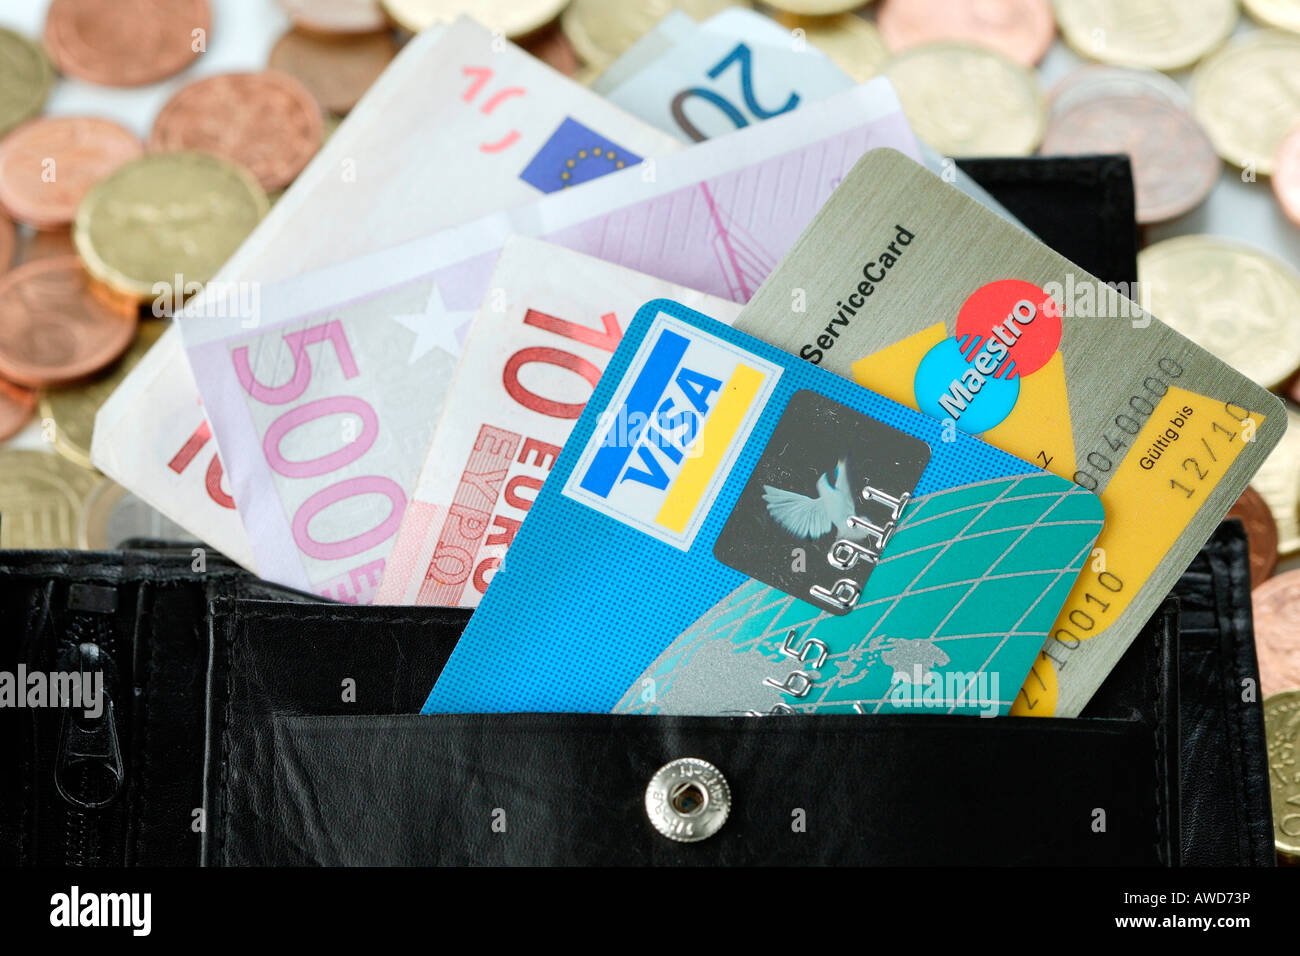 VISA credit card, EC Master Card, Euro bank notes and coins in a purse Stock Photo